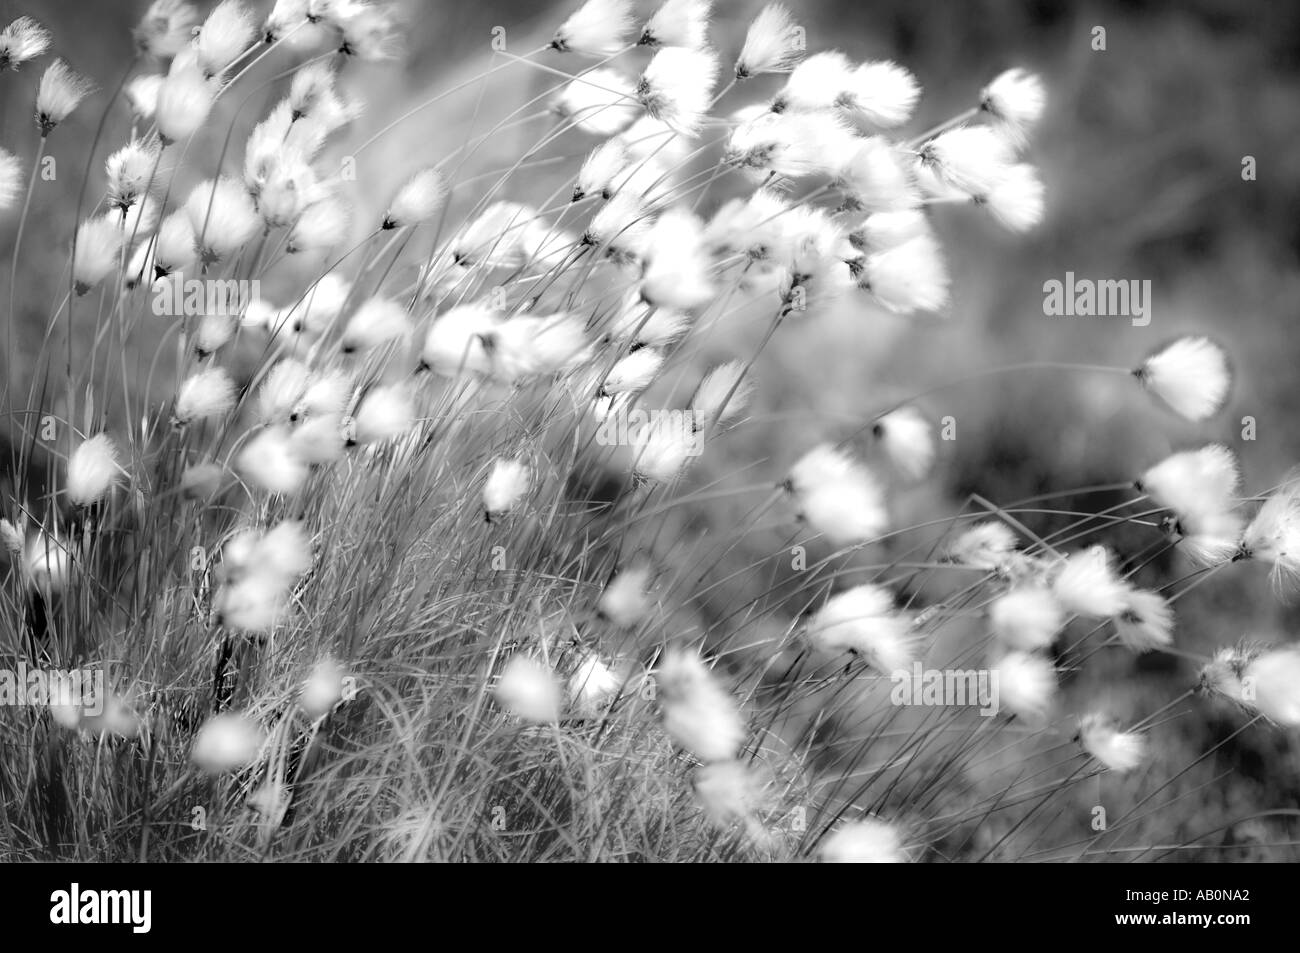 High Contrast Black and White Plant in The Wind Stock Photo